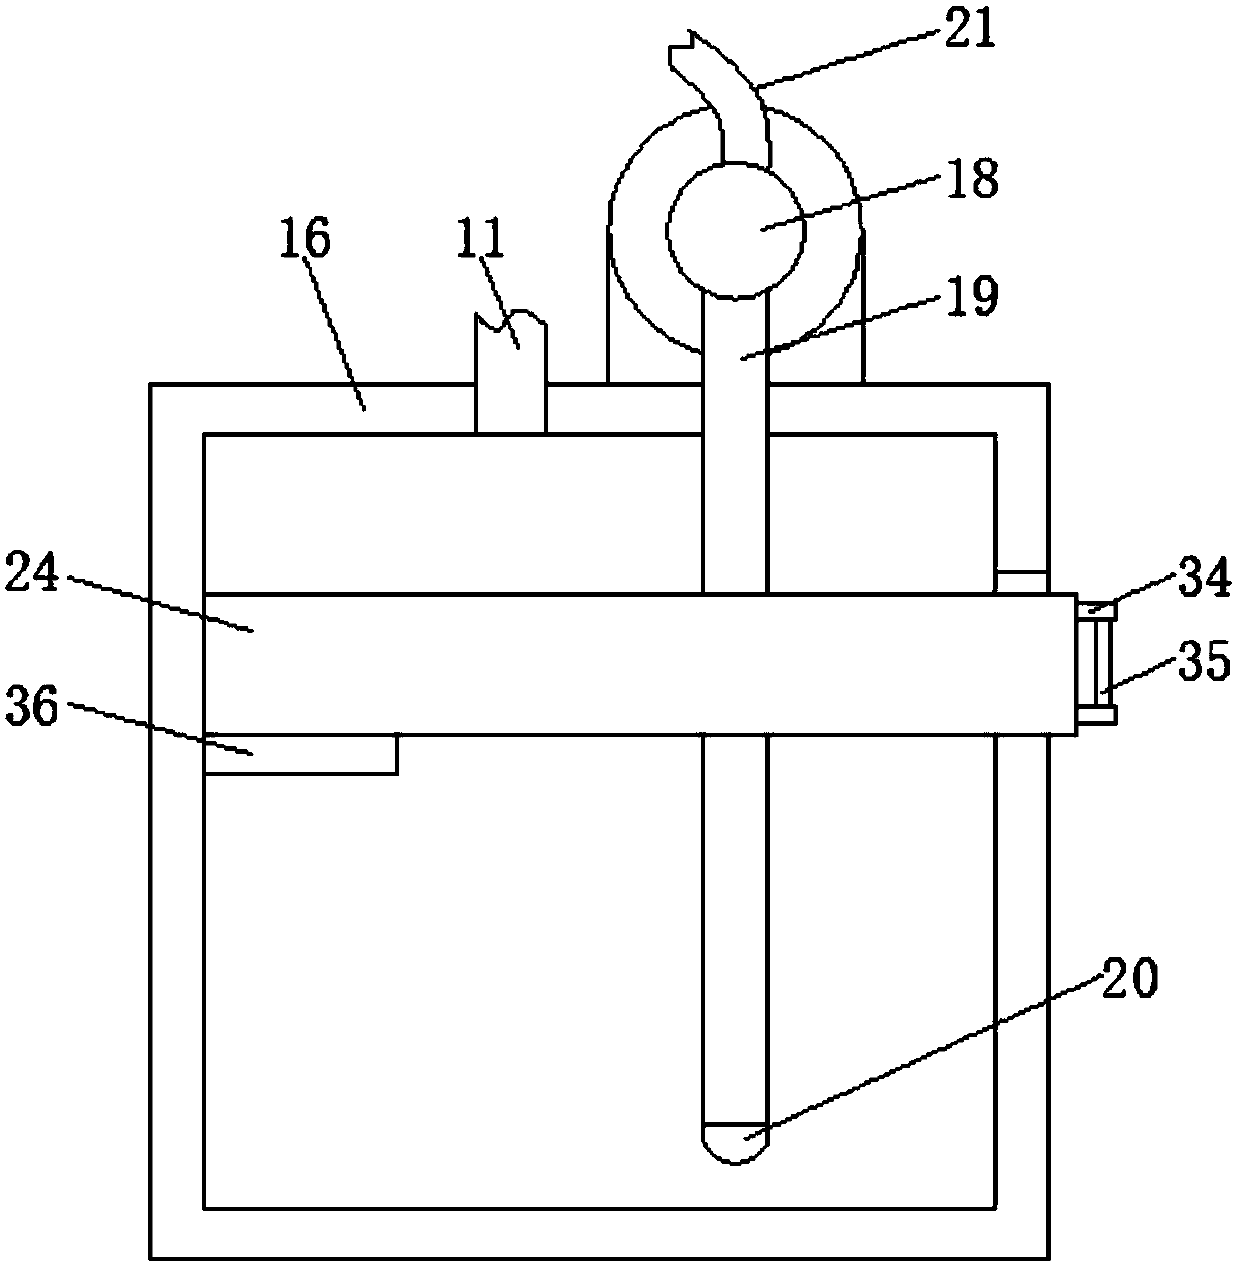 Stone cutting method with cooling water capable of being recycled